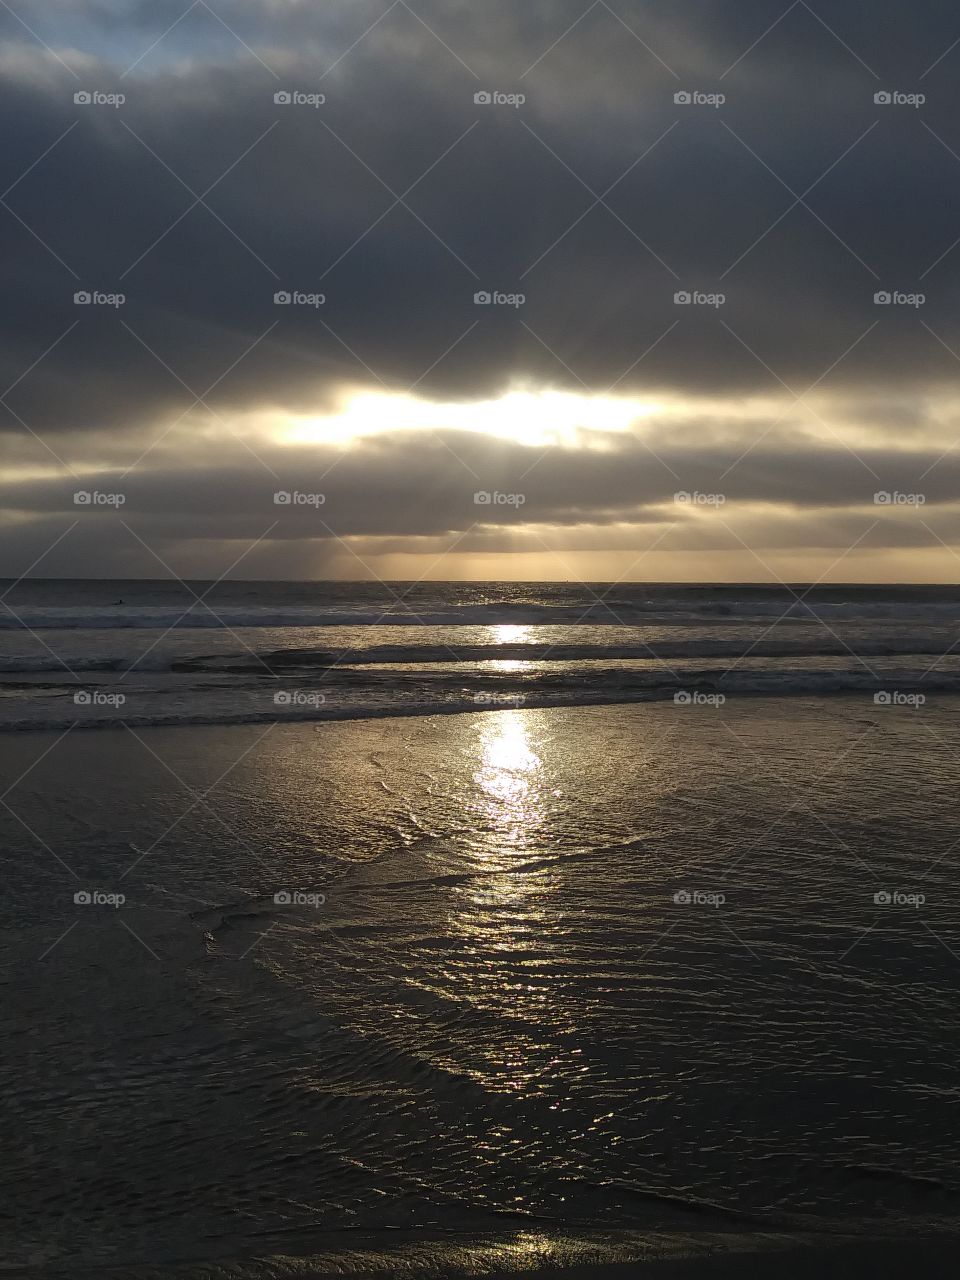 sun rays peering through clouds cascading over waves and sand